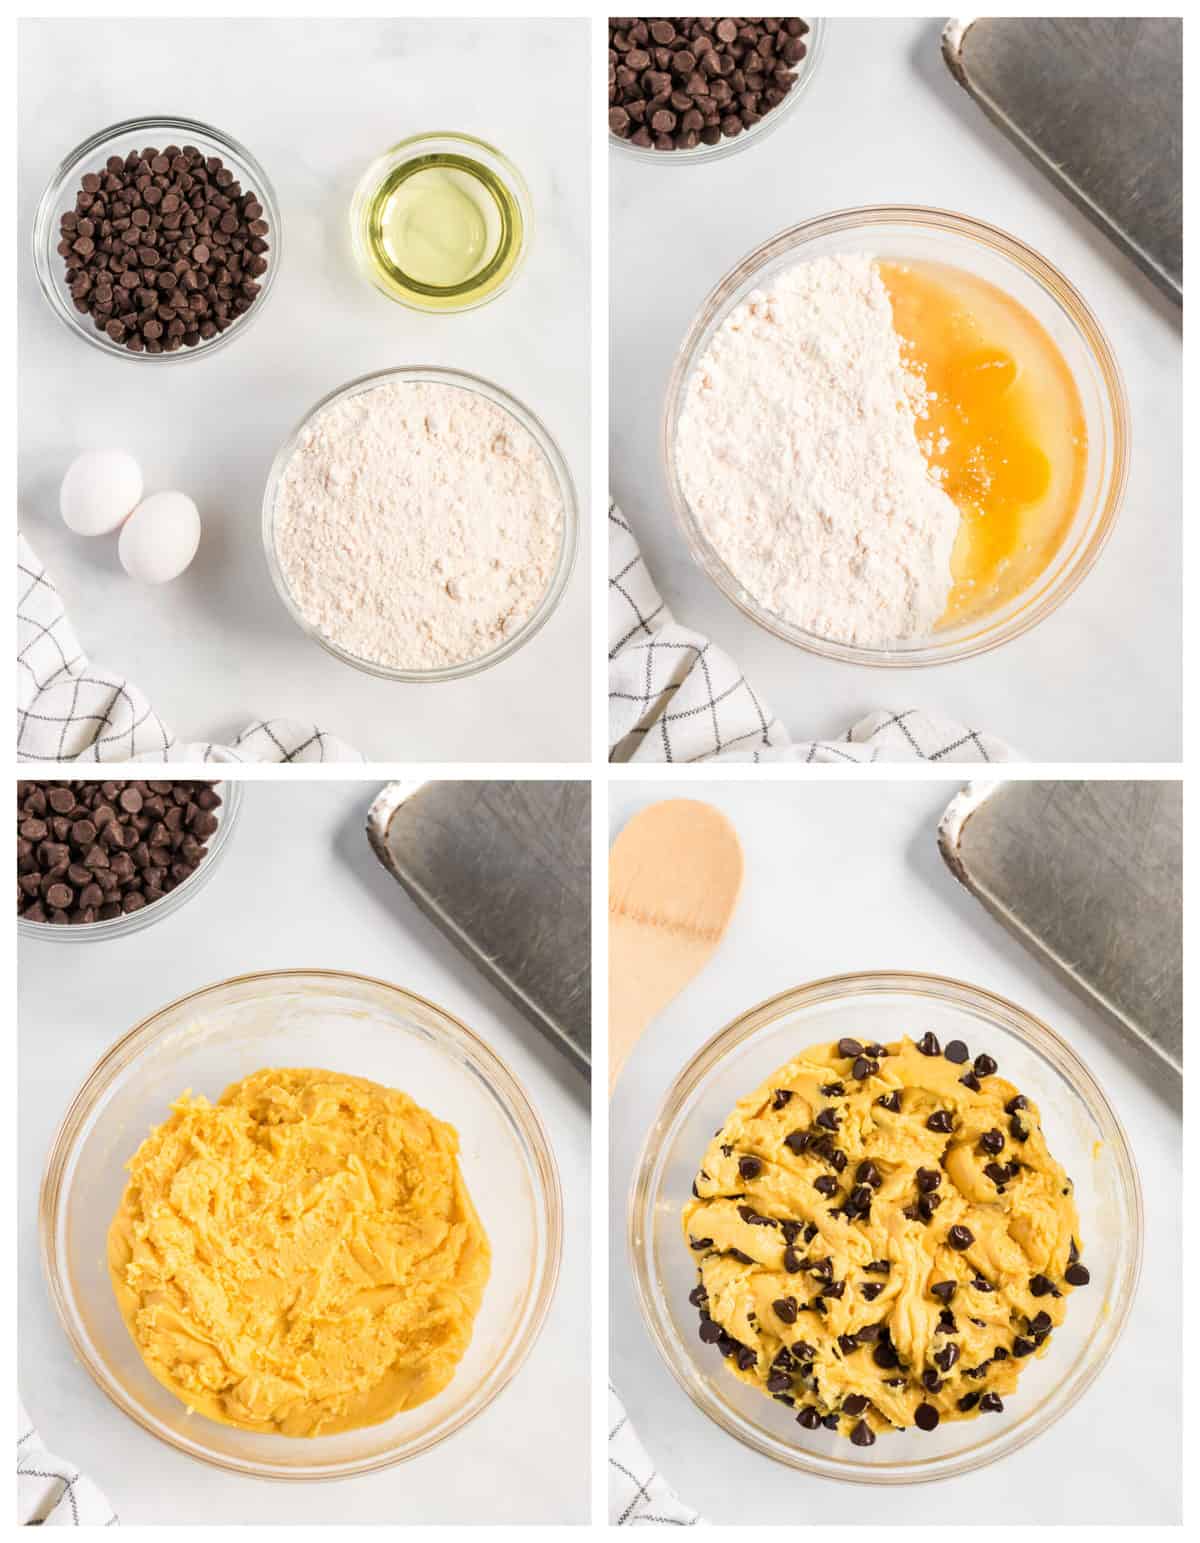 four step collage image showing ingredients and batter preparation